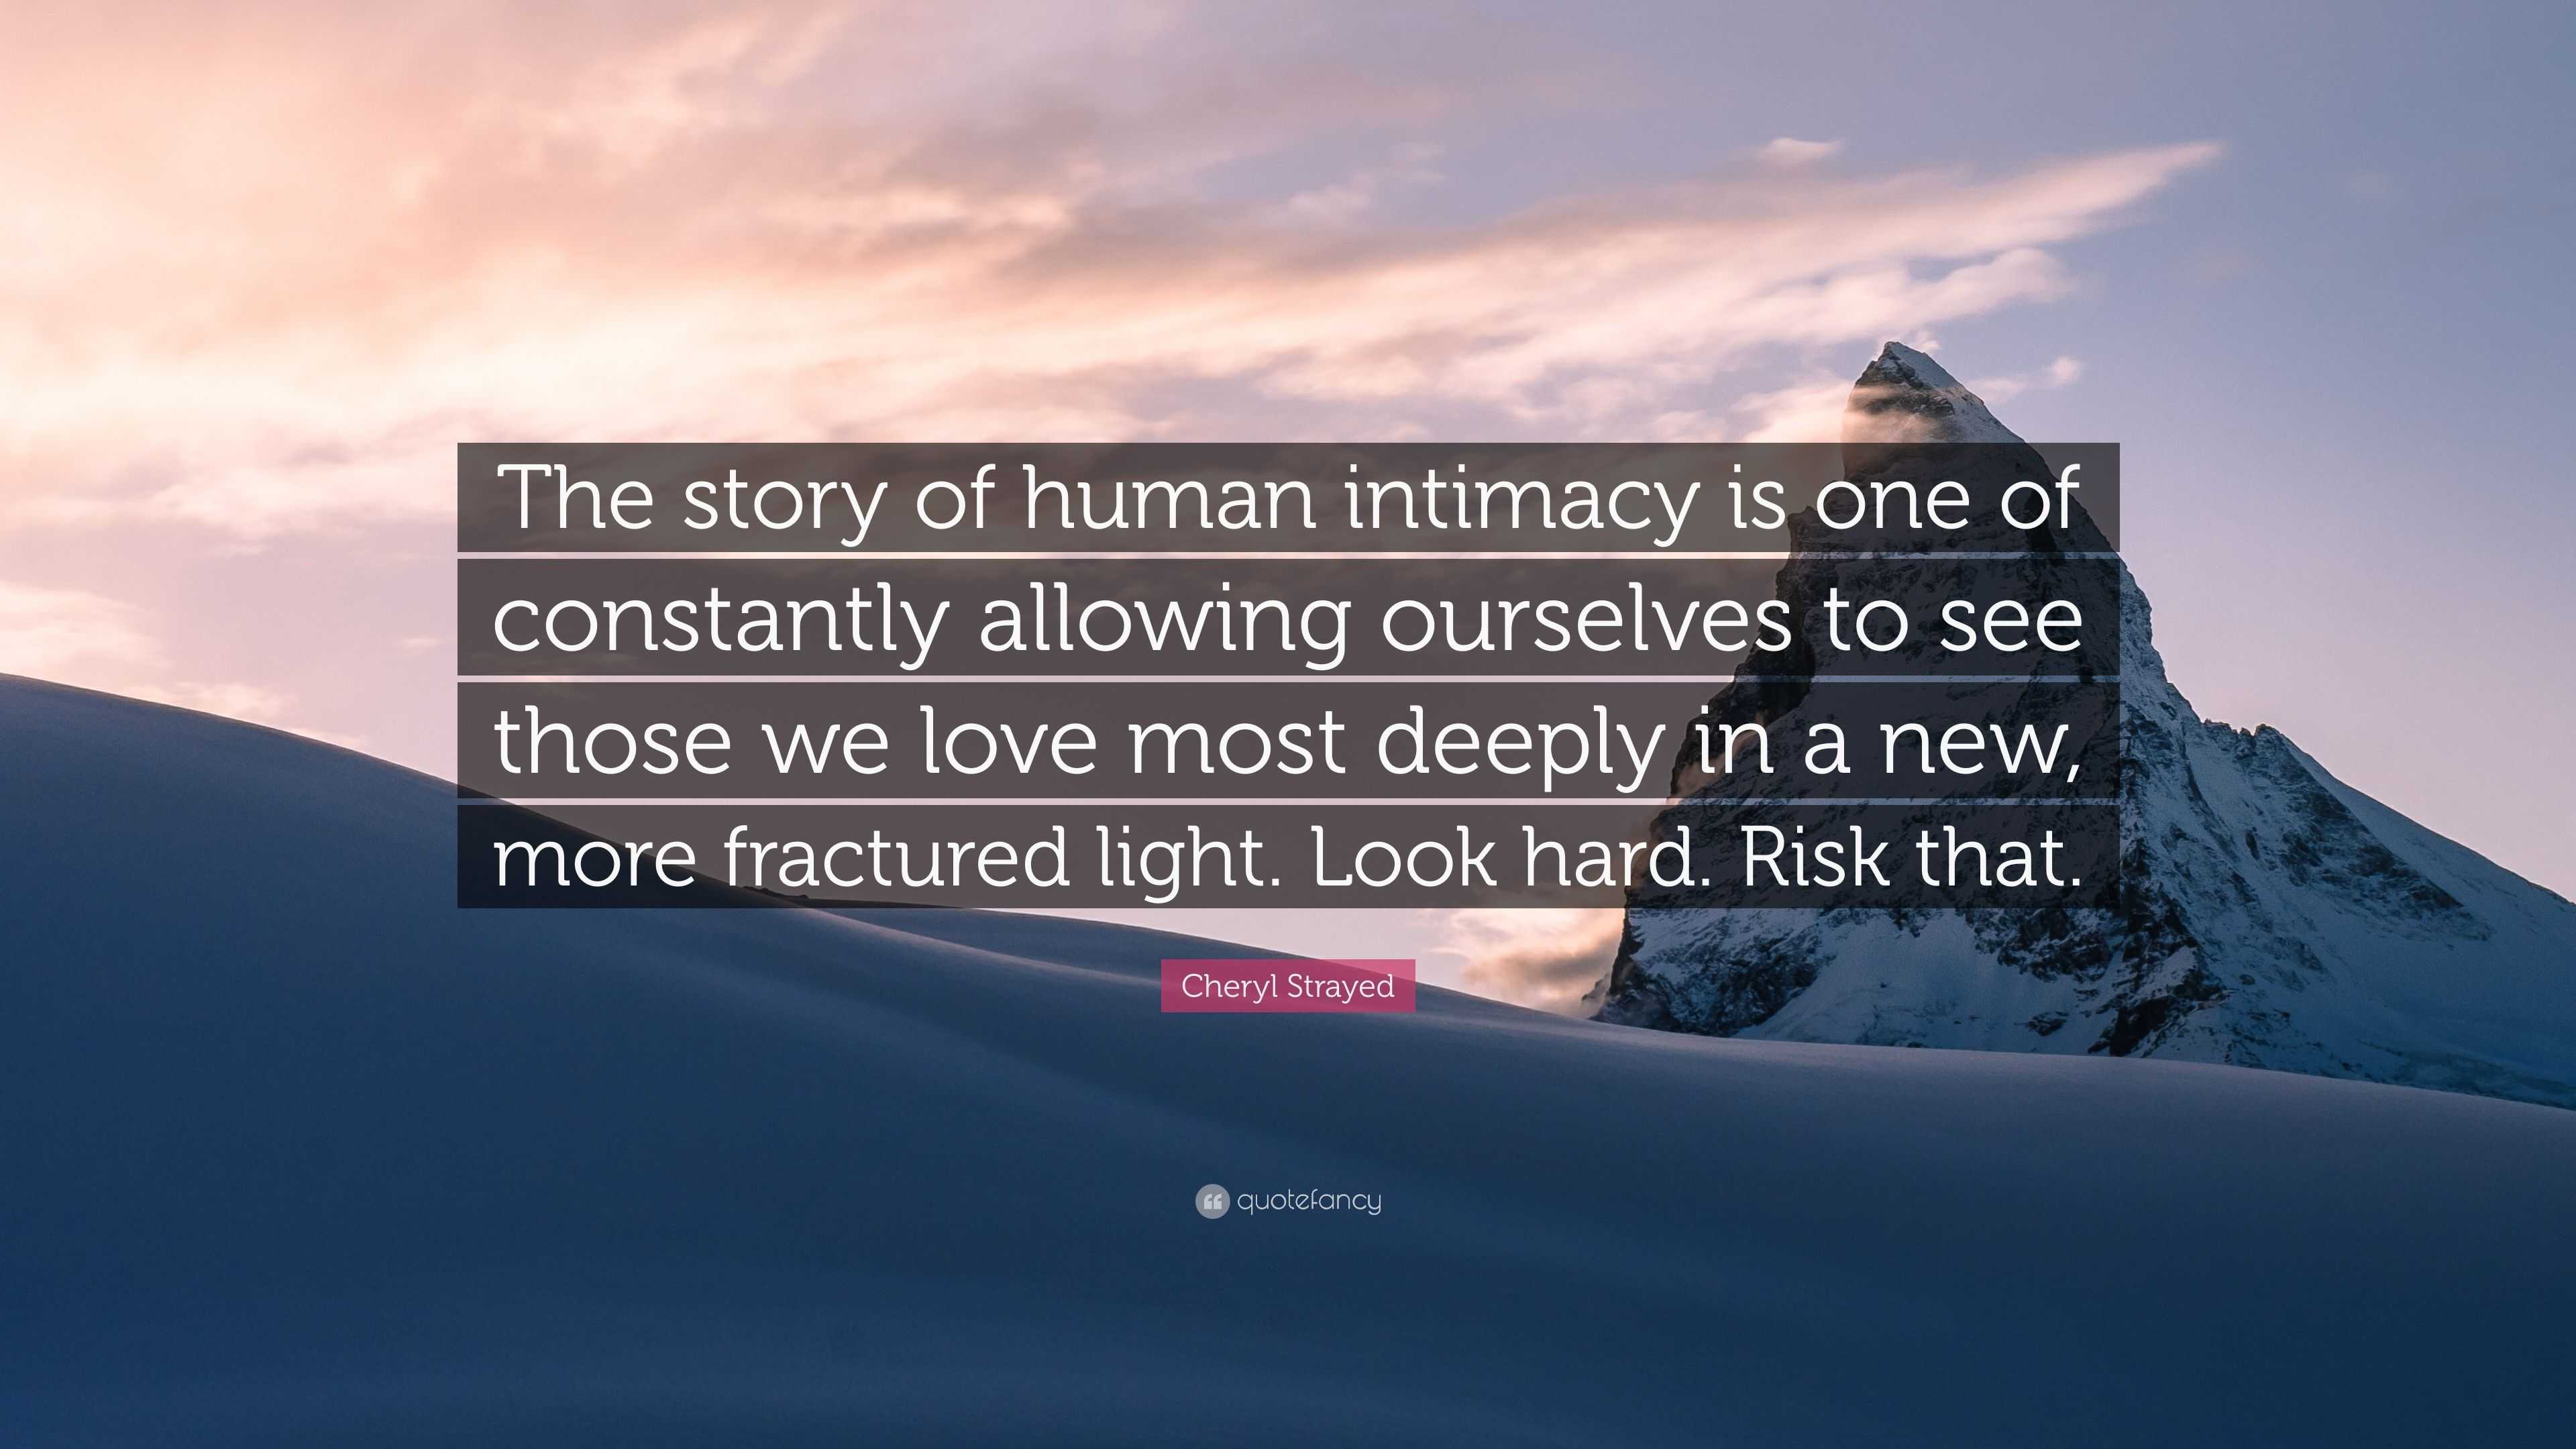 Cheryl Strayed Quote: “The story of human intimacy is one of constantly ...